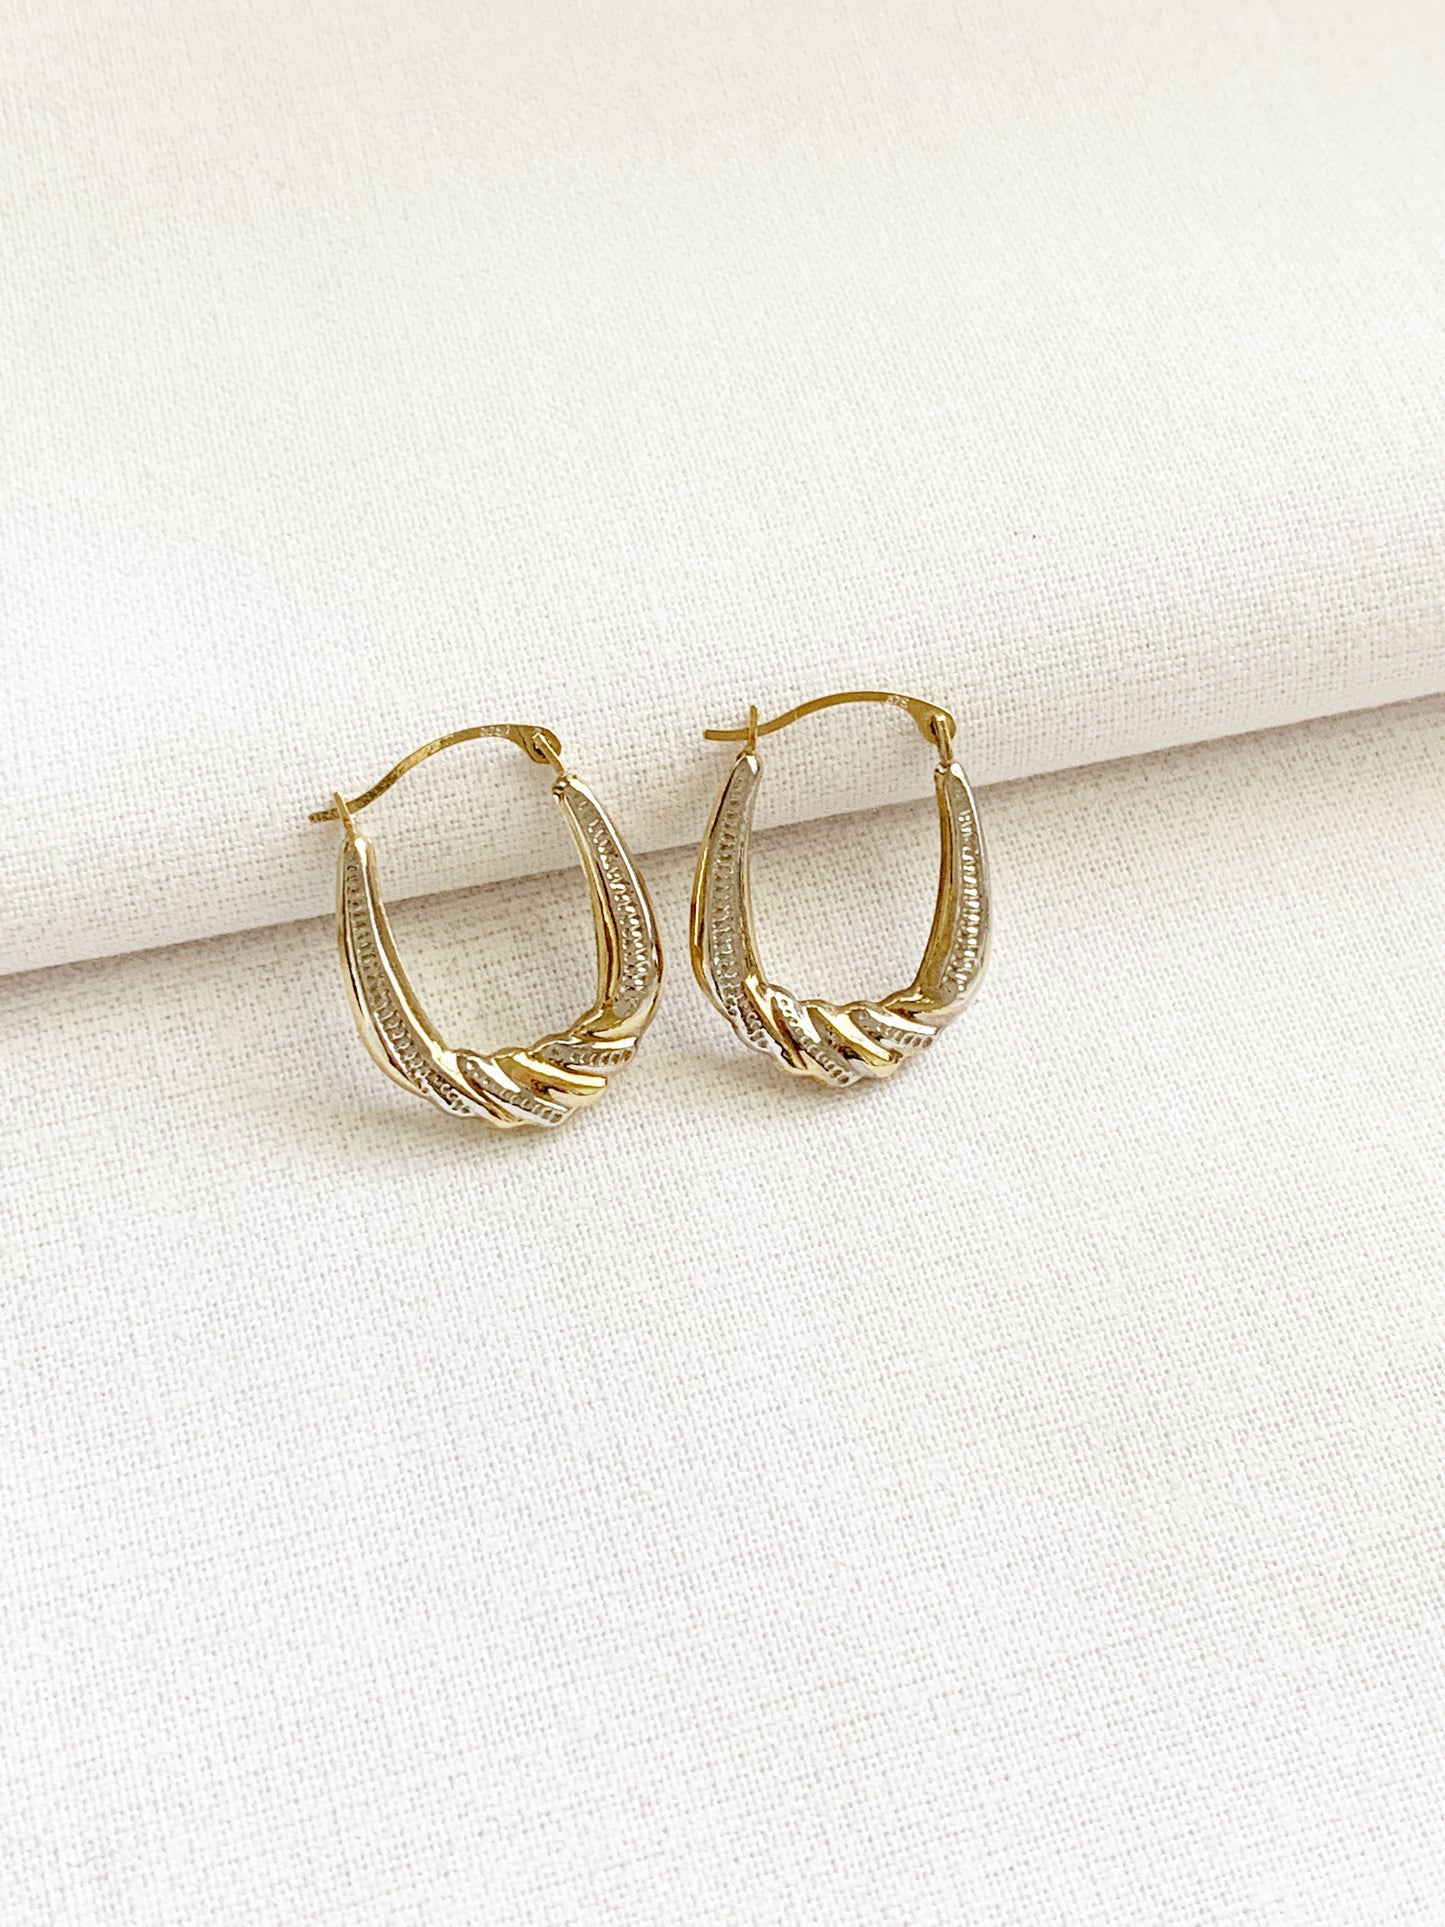 Vintage 9ct Yellow and White Gold Hoop Earrings